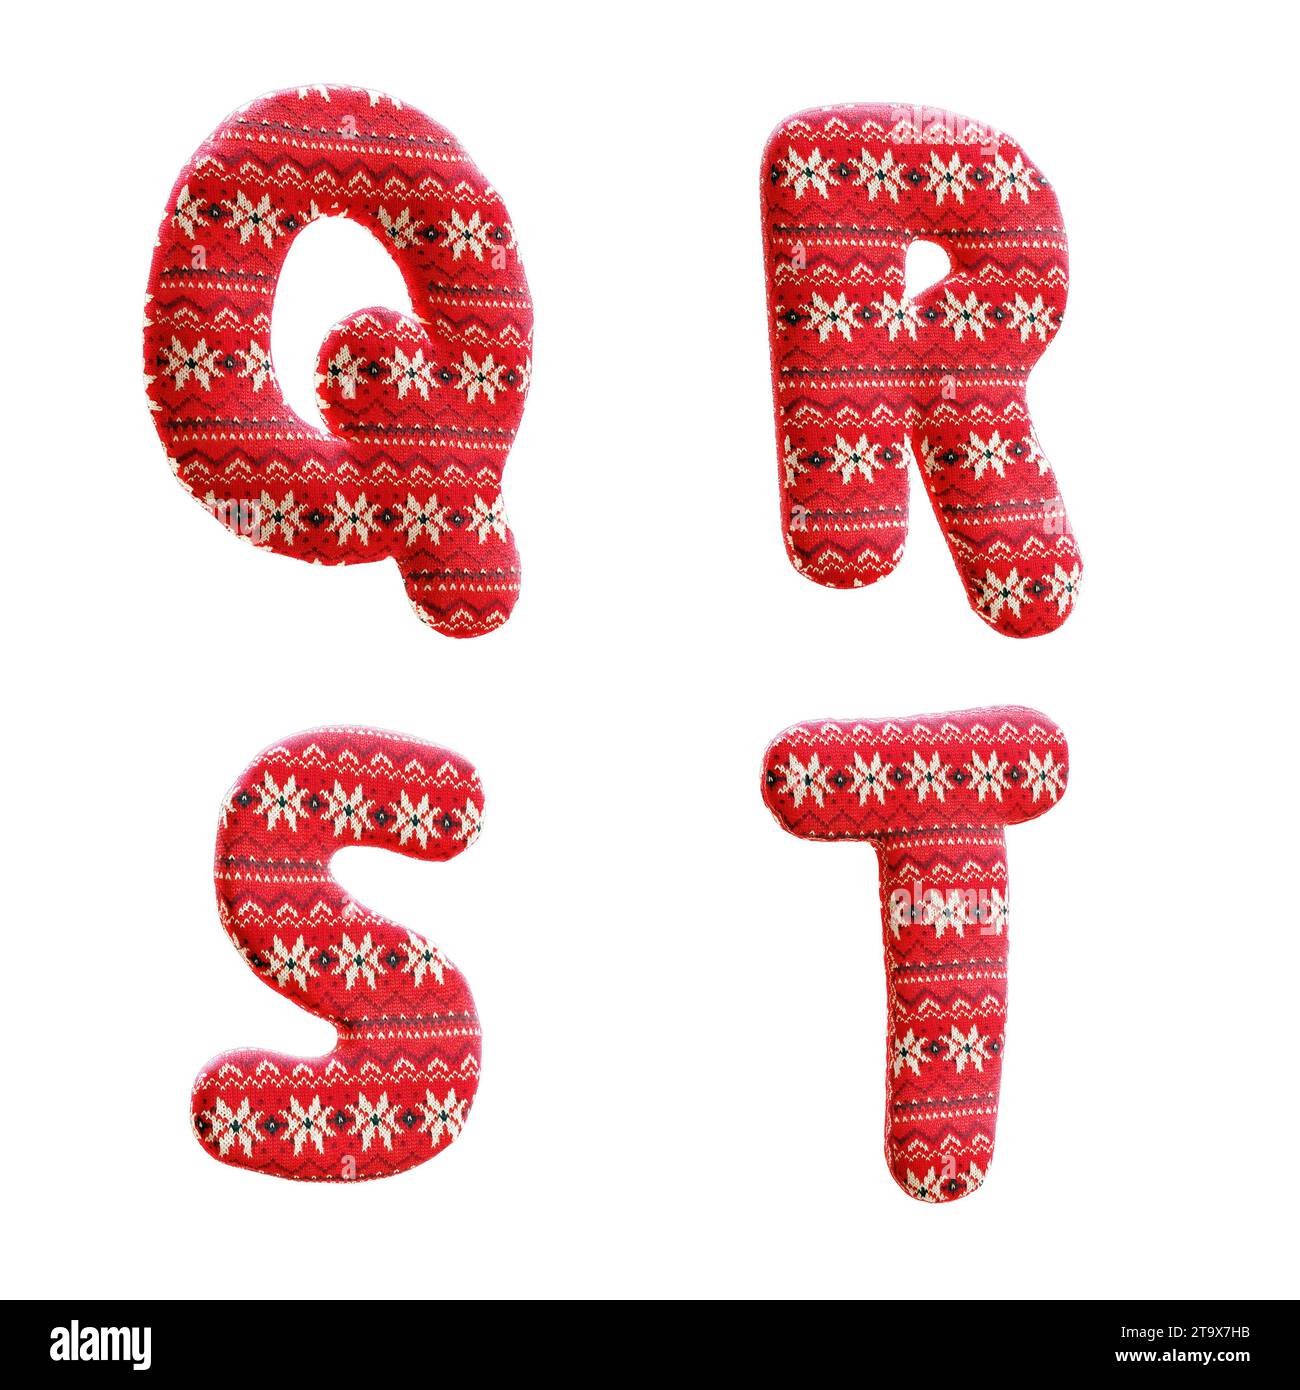 3d rendering of knitted christmas fabric alphabet - letters Q-T Stock Photo